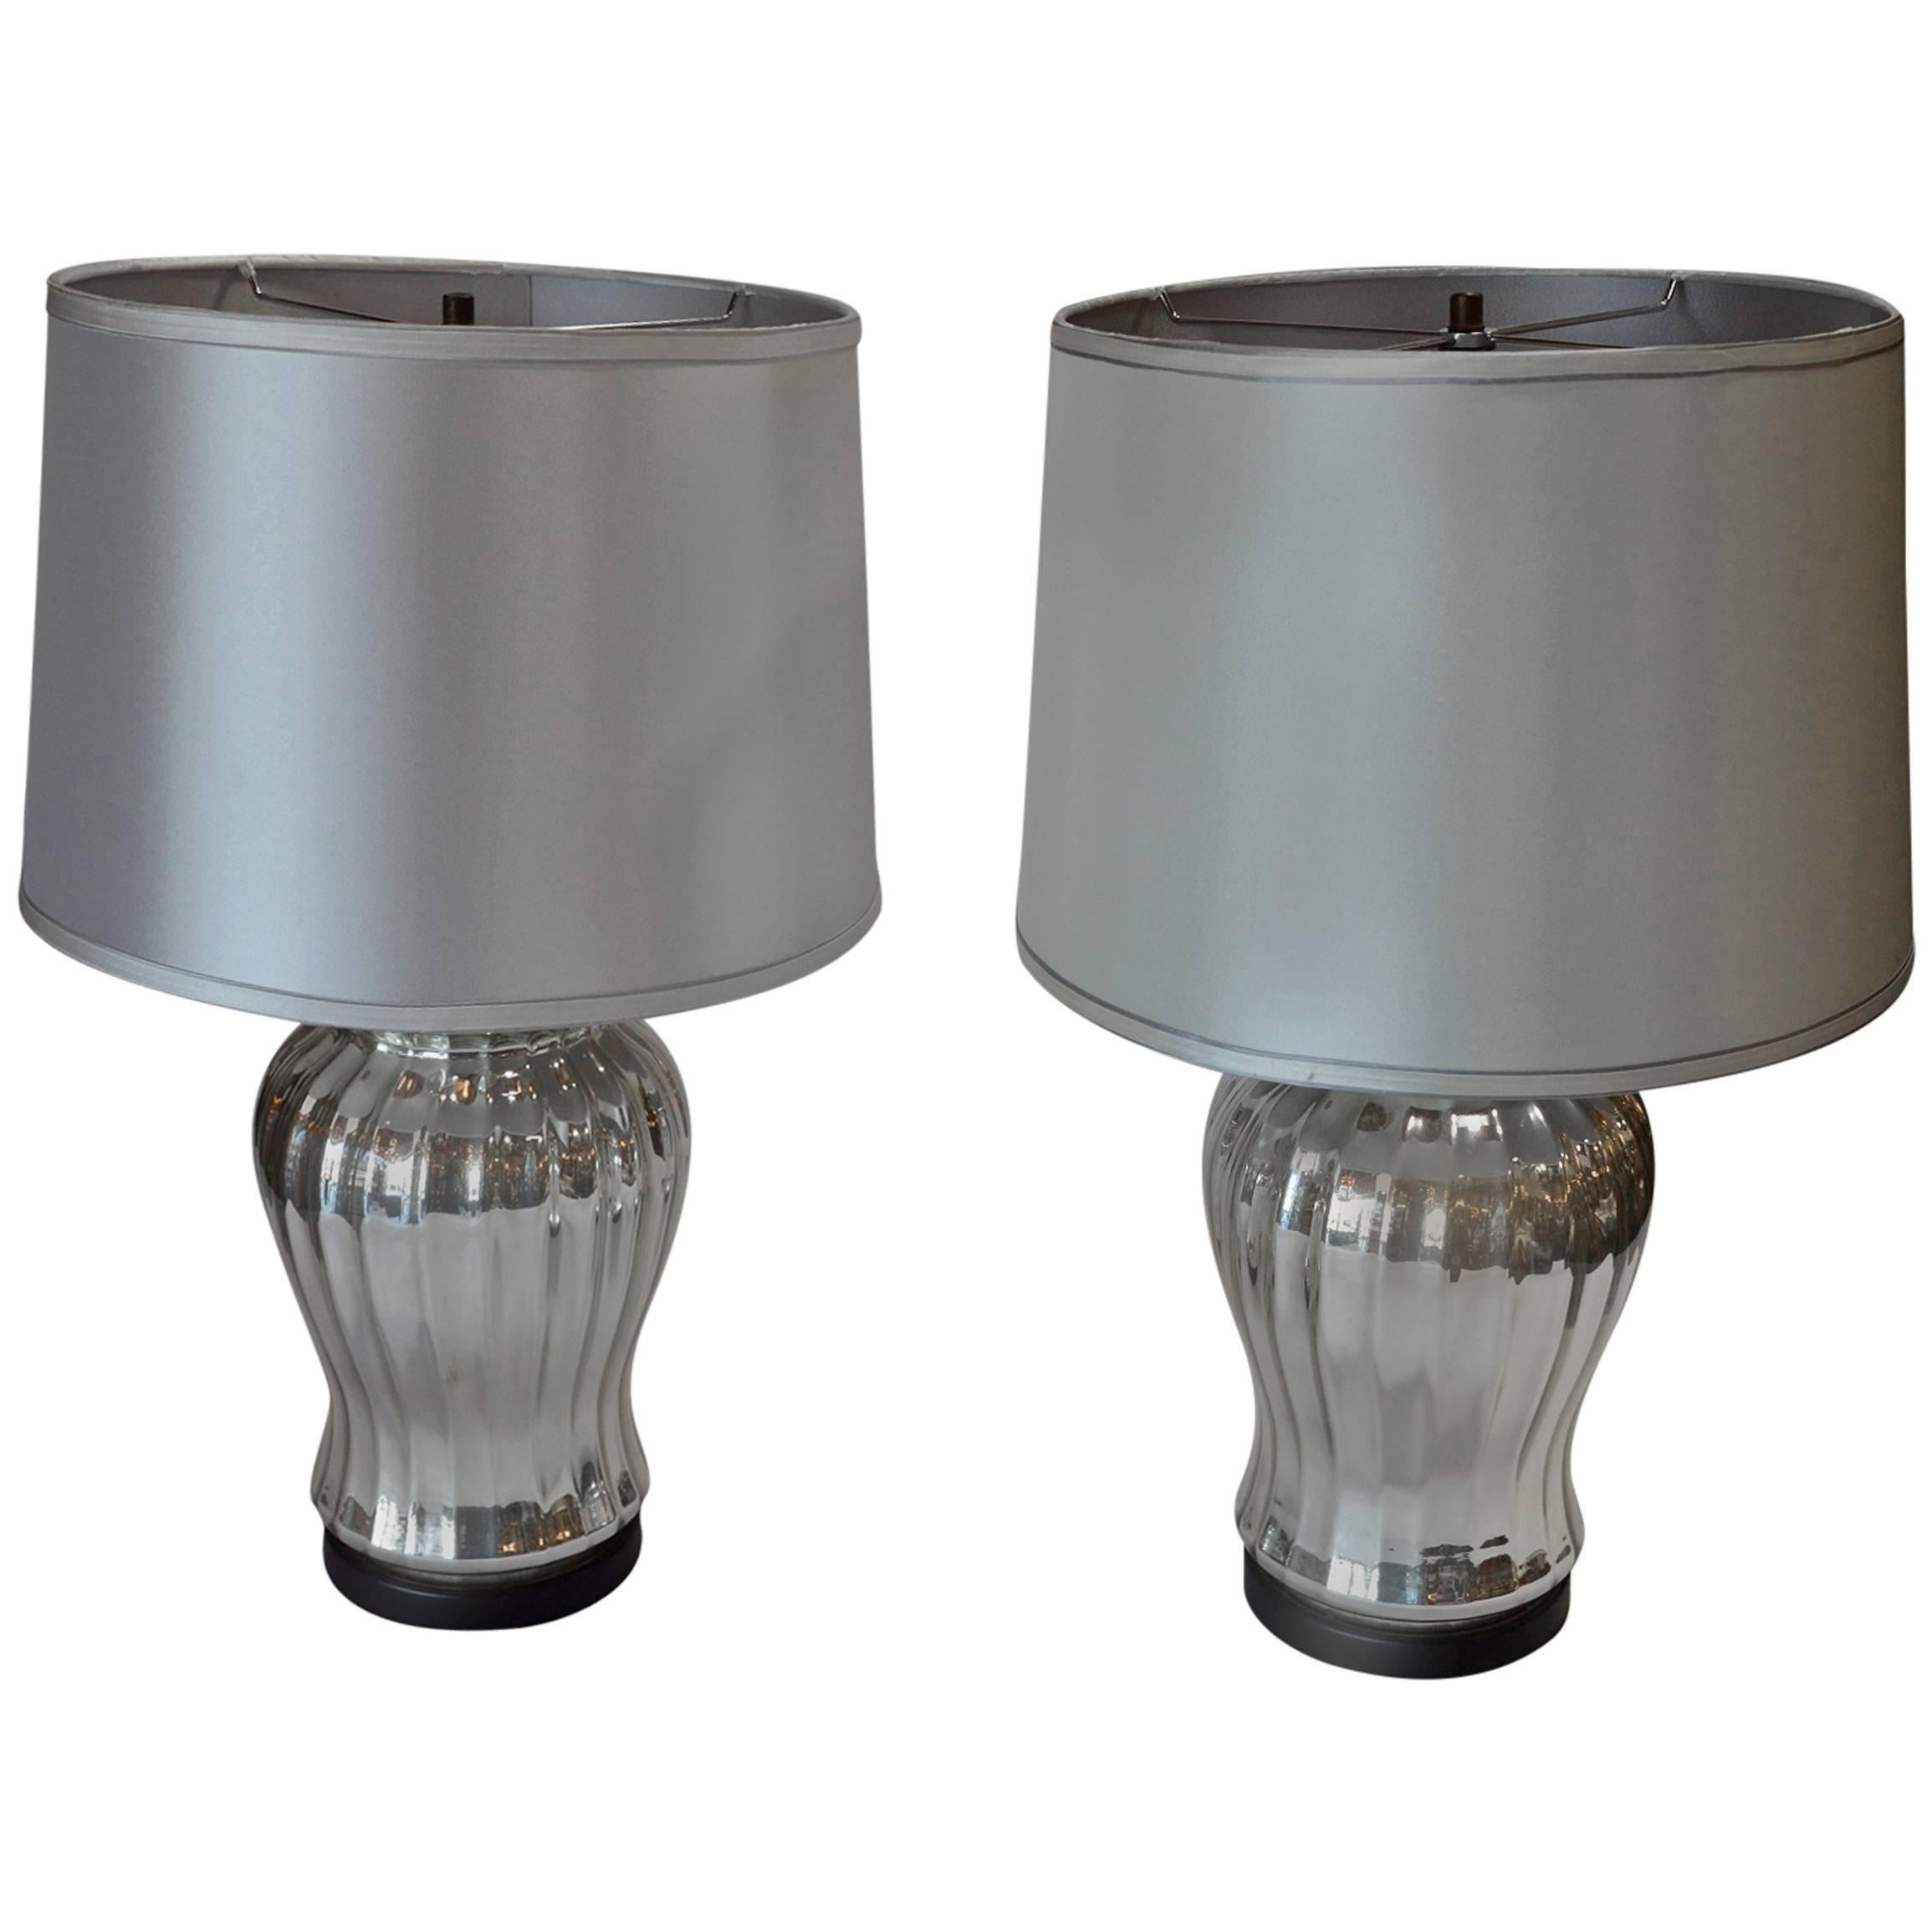 Pair of Silver Mercury Glass Table Lamps